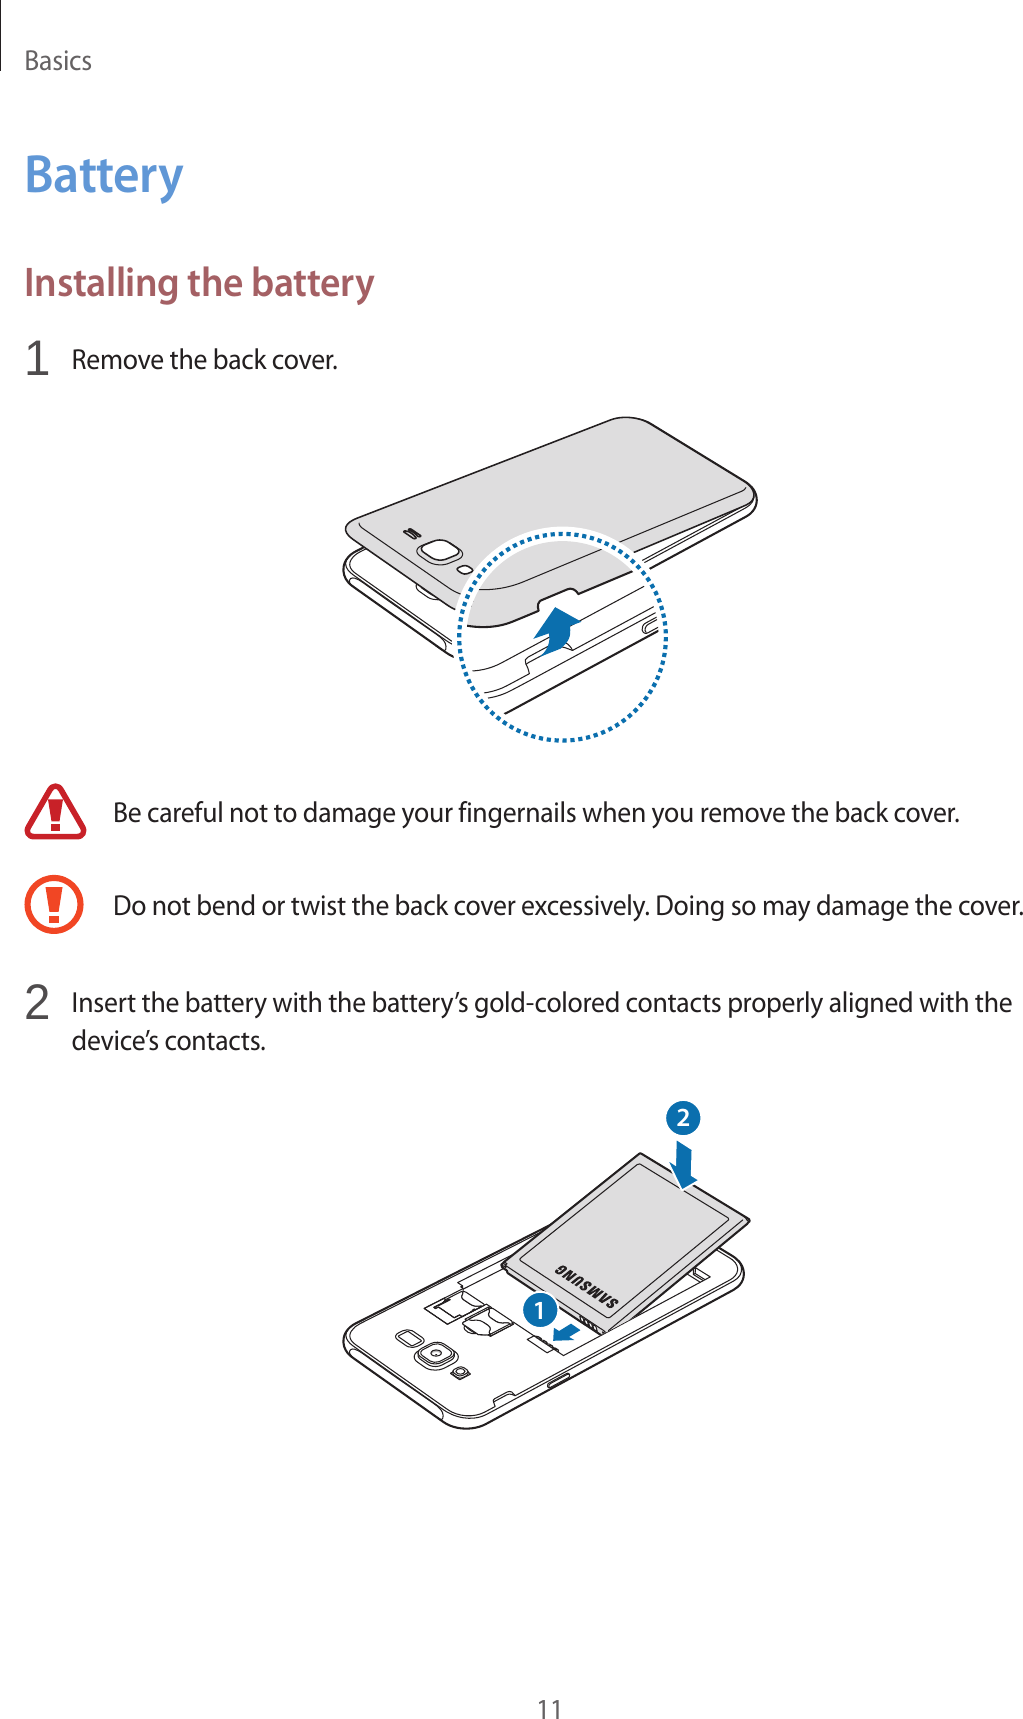 Basics11BatteryInstalling the battery1  Remove the back cover.Be careful not to damage your fingernails when you remove the back cover.Do not bend or twist the back cover excessively. Doing so may damage the cover.2  Insert the battery with the battery’s gold-colored contacts properly aligned with the device’s contacts.12